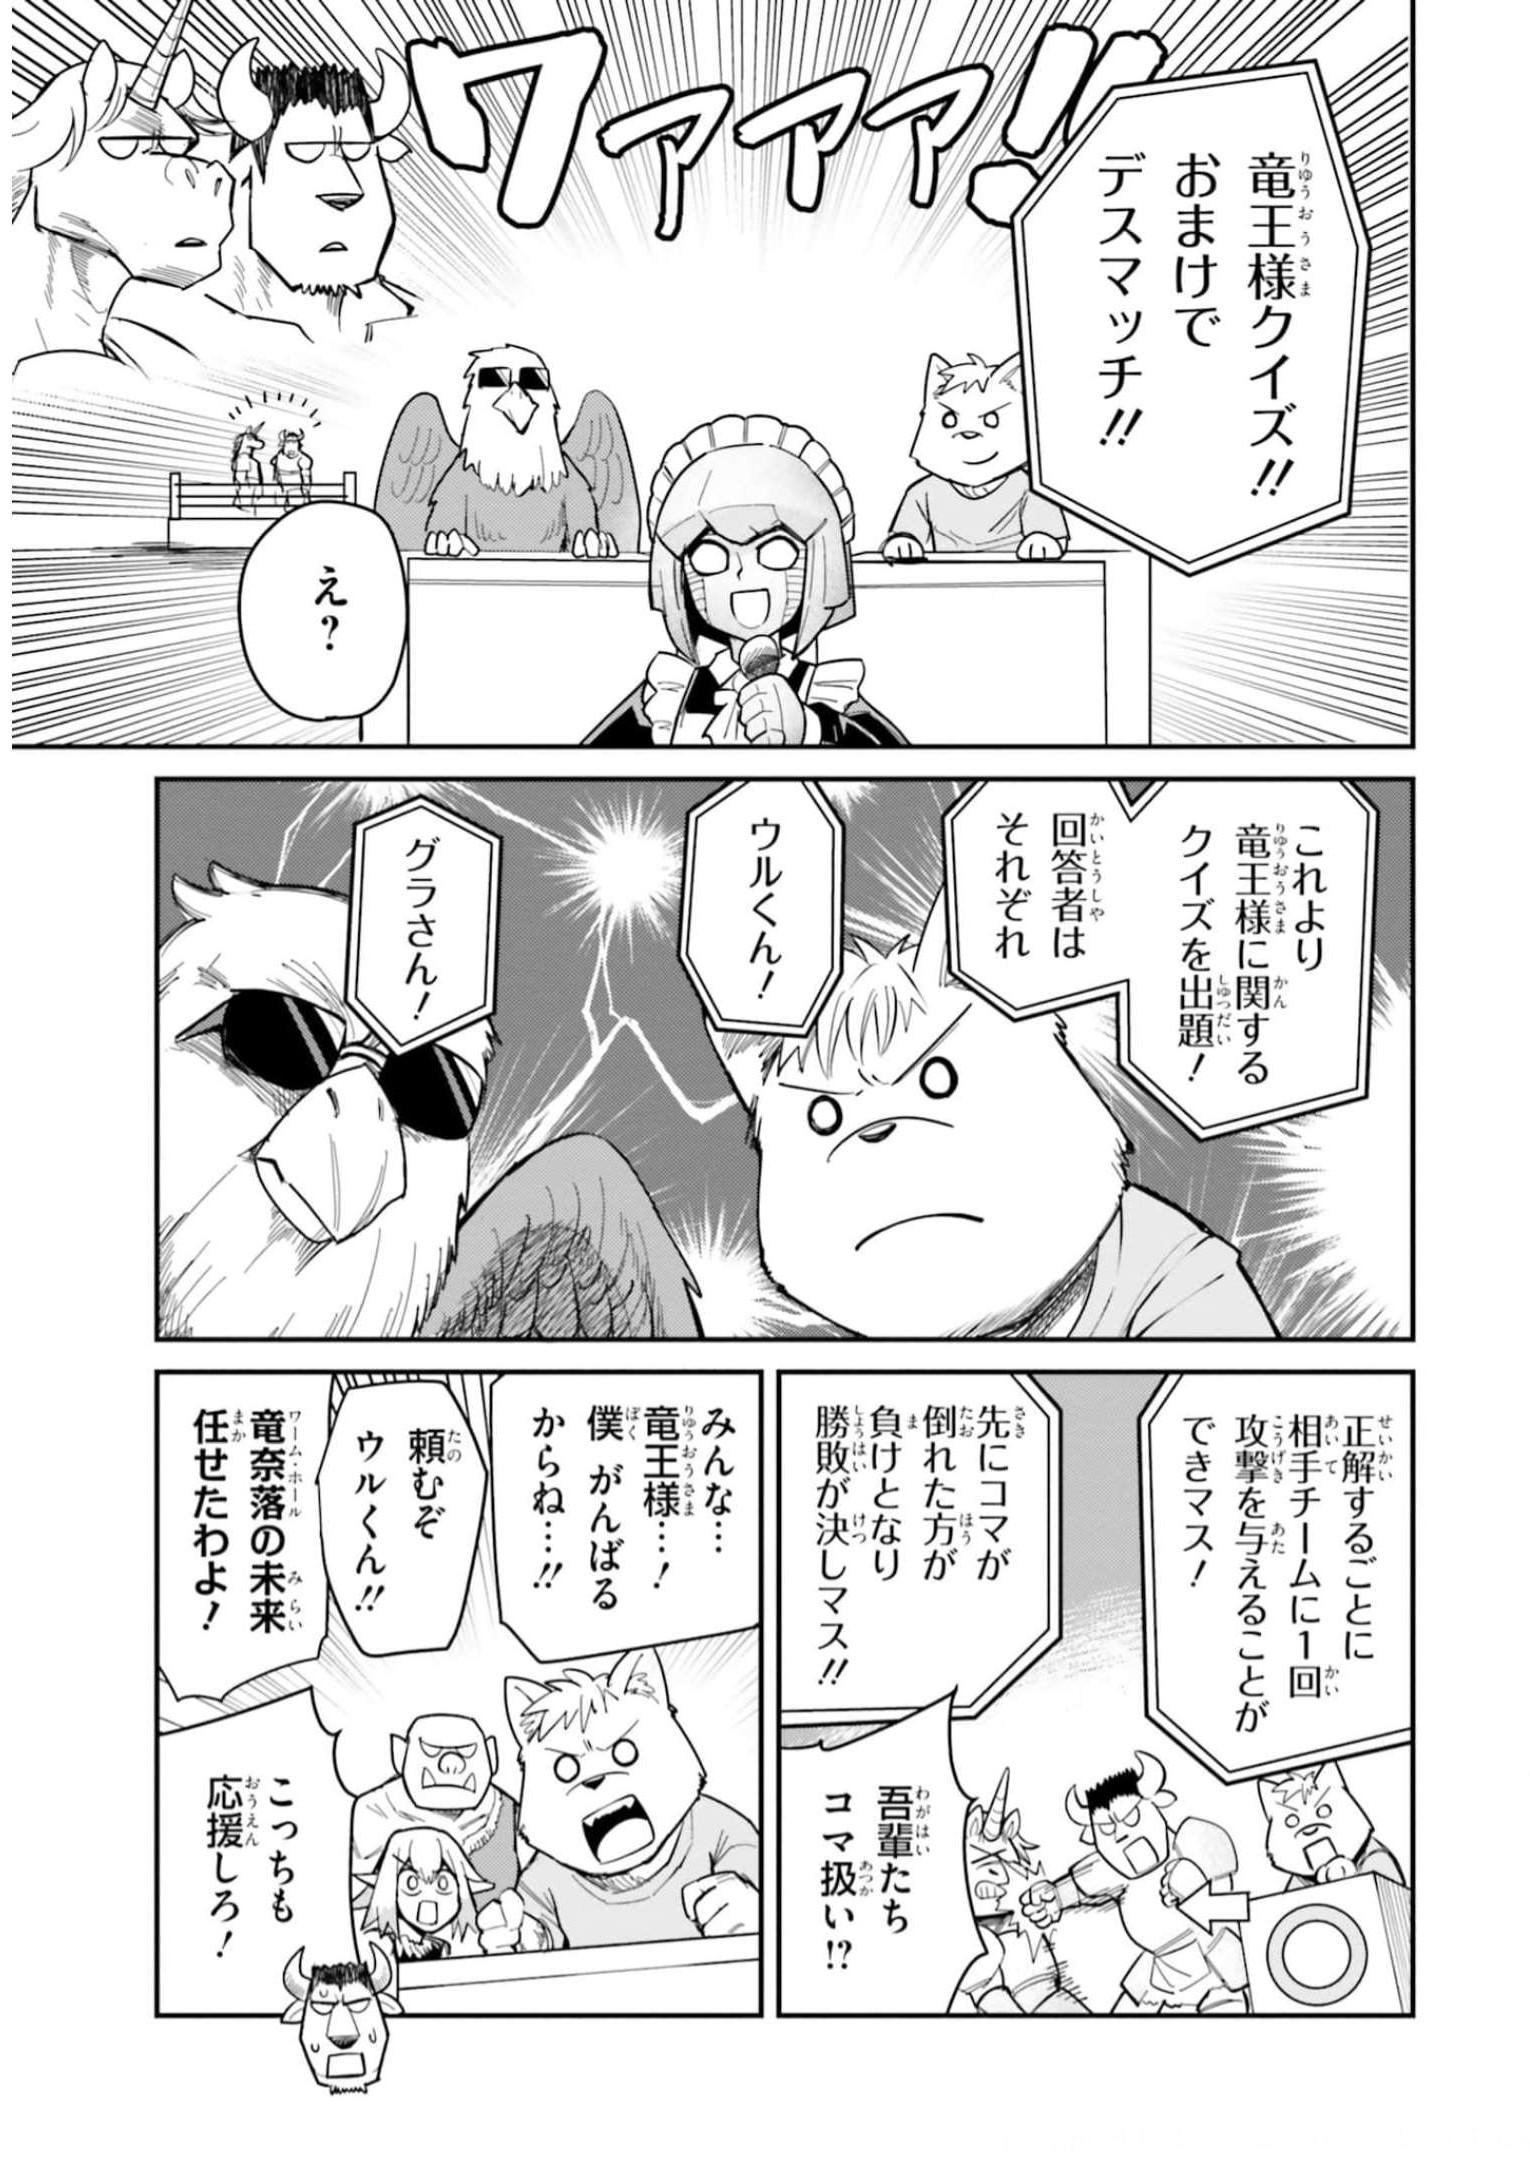 Dungeon Friends Forever Dungeon's Childhood Friend ダンジョンの幼なじみ 第21話 - Page 4